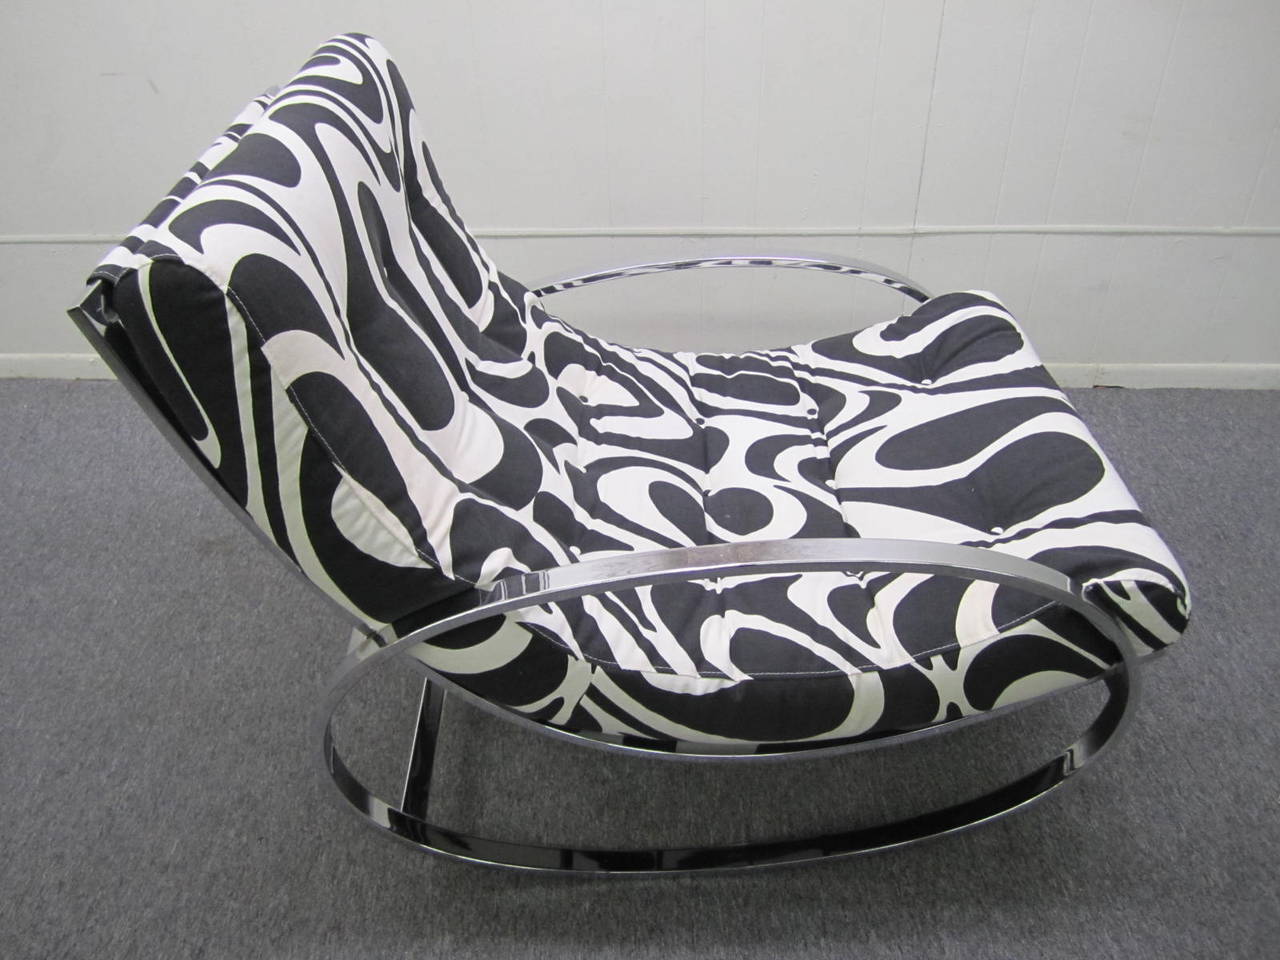 Exciting Milo Baughman style chrome oval rocker. Psychedelic Panton inspired black and white vintage fabric covers the removable pad and looks amazing. The mirror polished chromed frame is also in fabulous vintage condition-a real show piece. Please